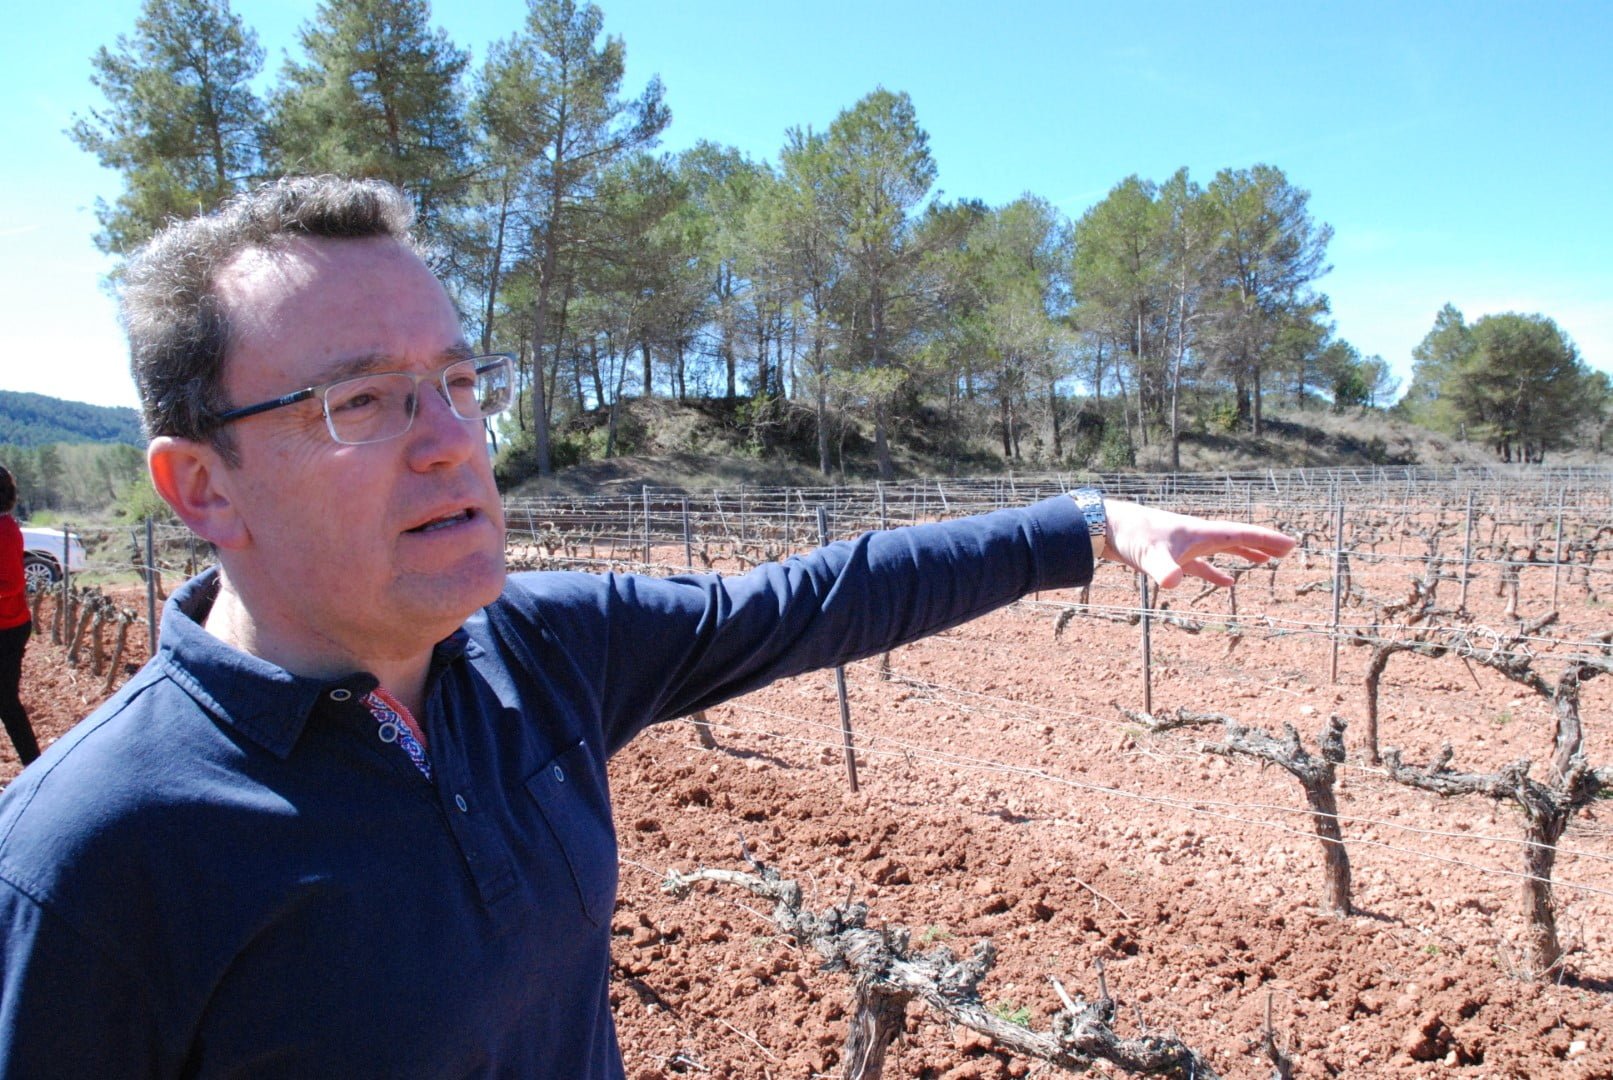 Fransola or Sauvignon in the unlikely setting of the Penedès region